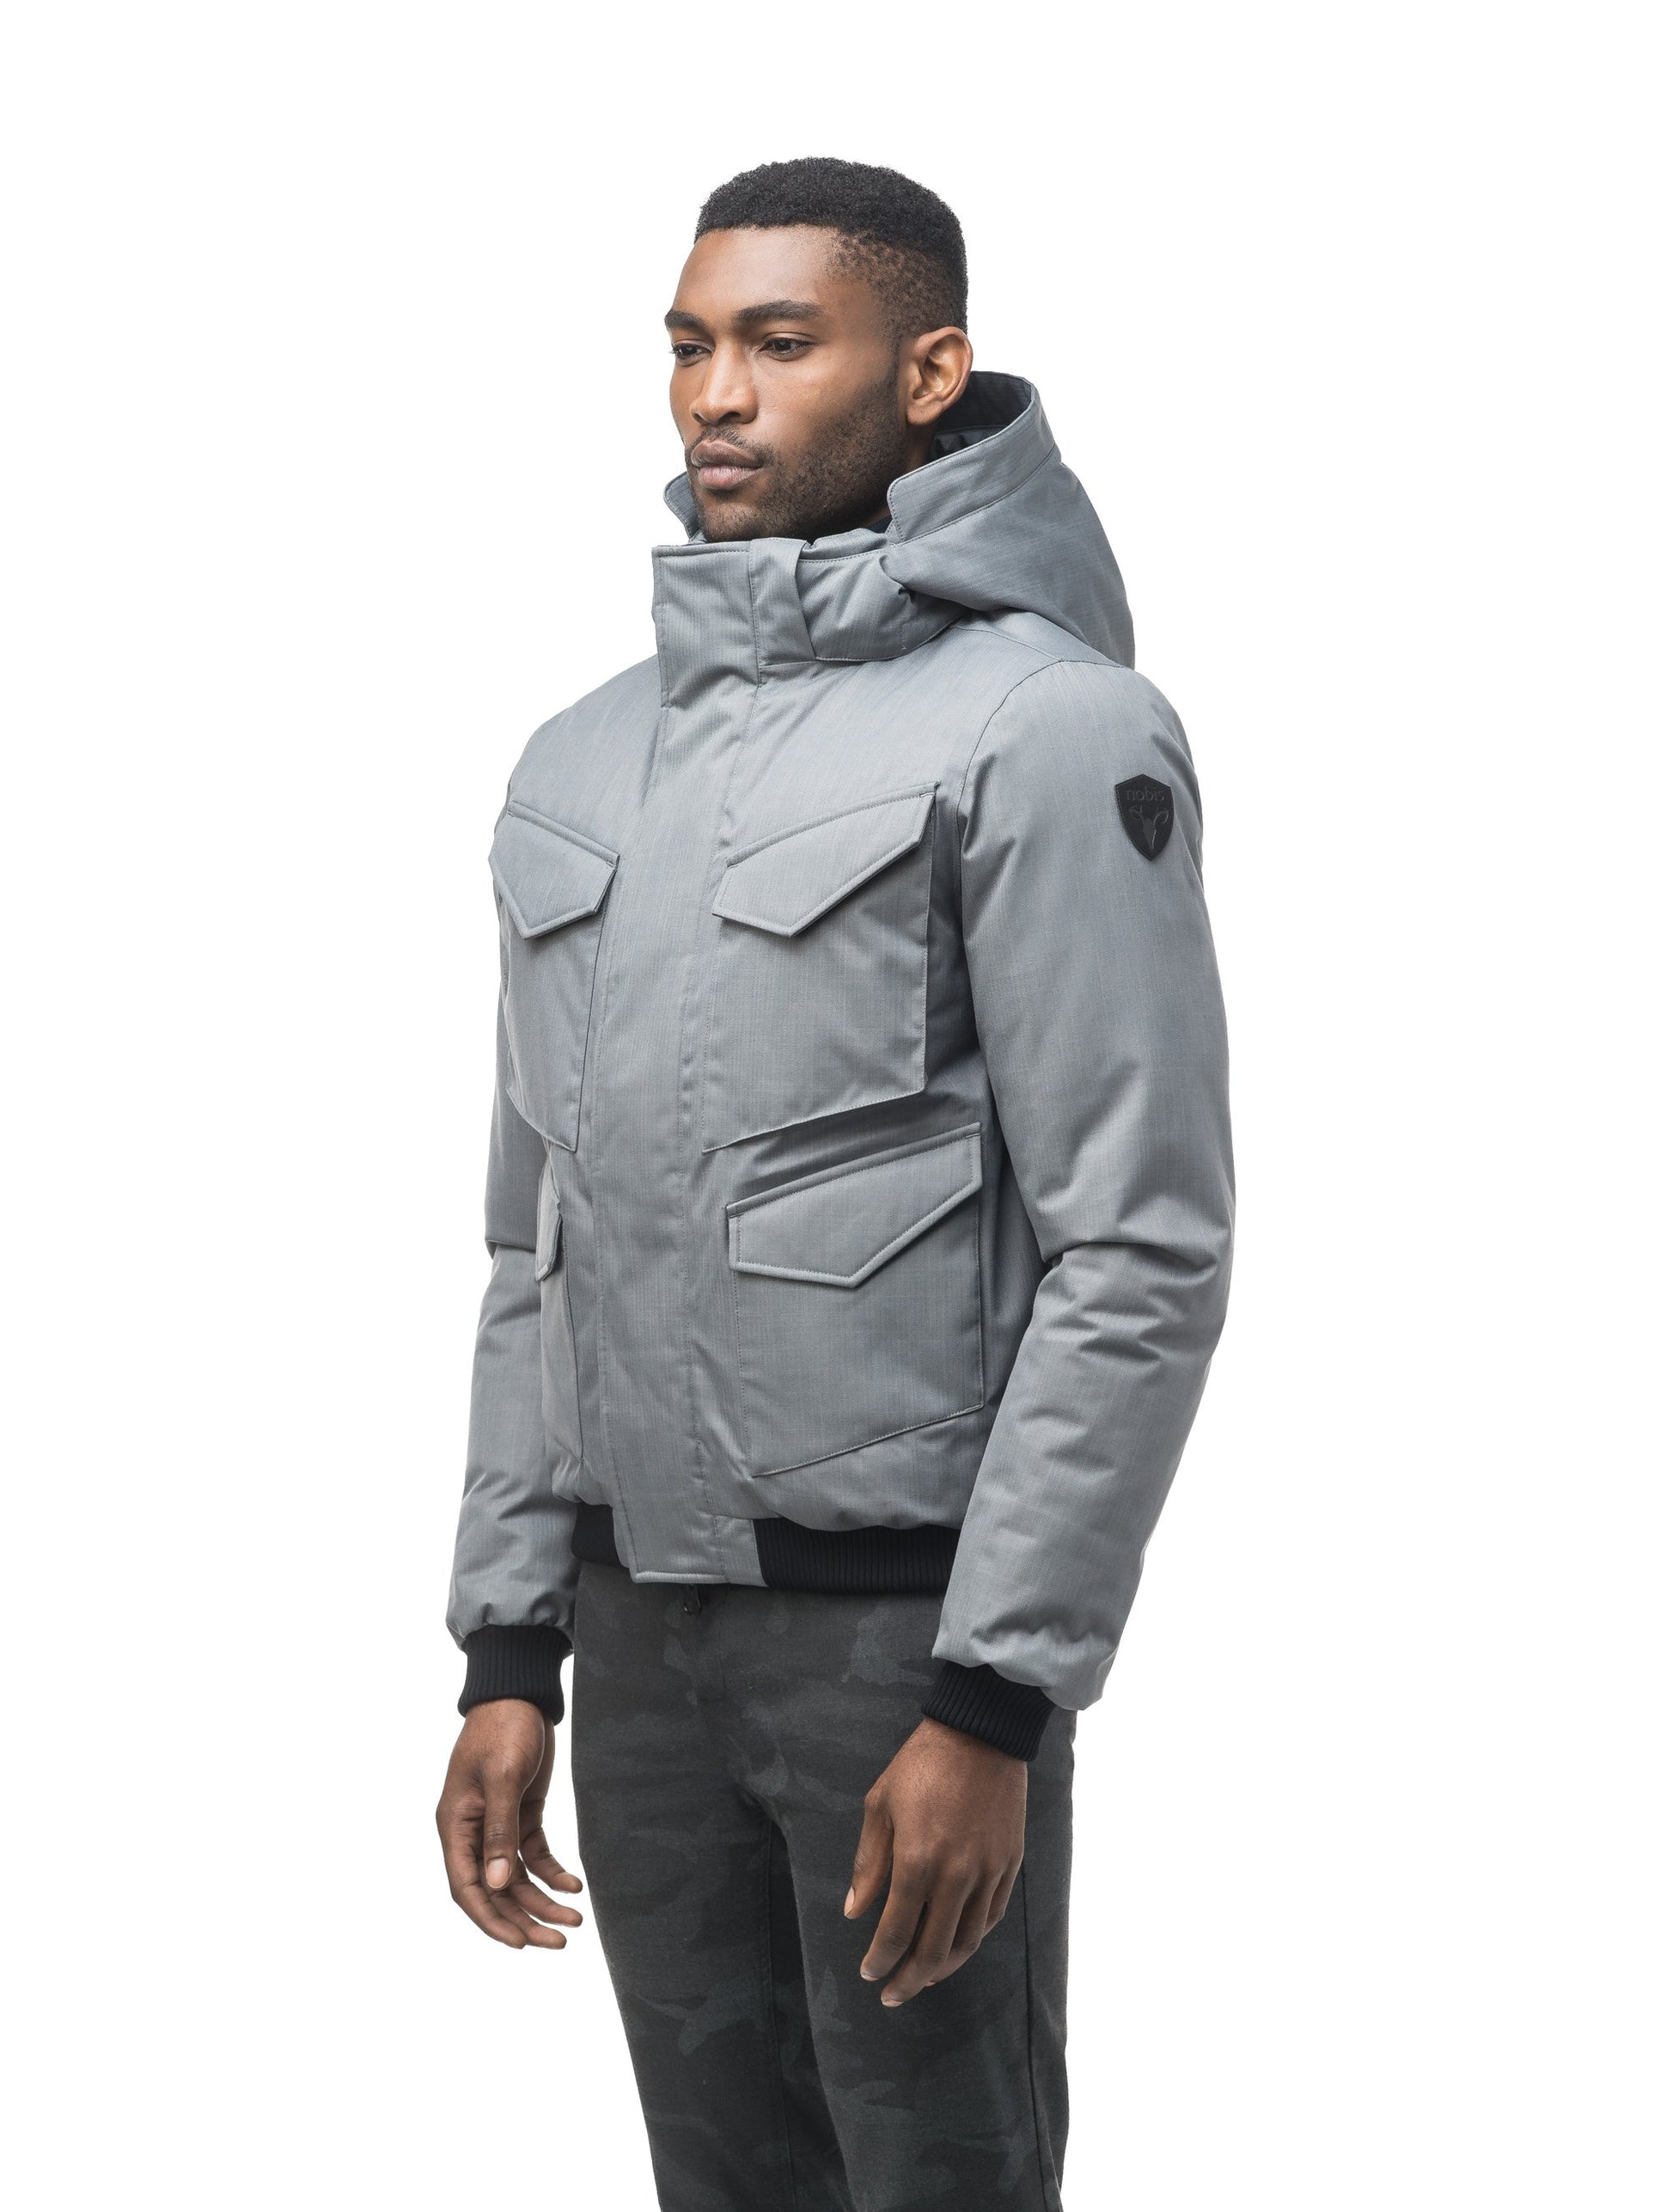 Men's waist length bomber with four huge pockets on the front in Concrete